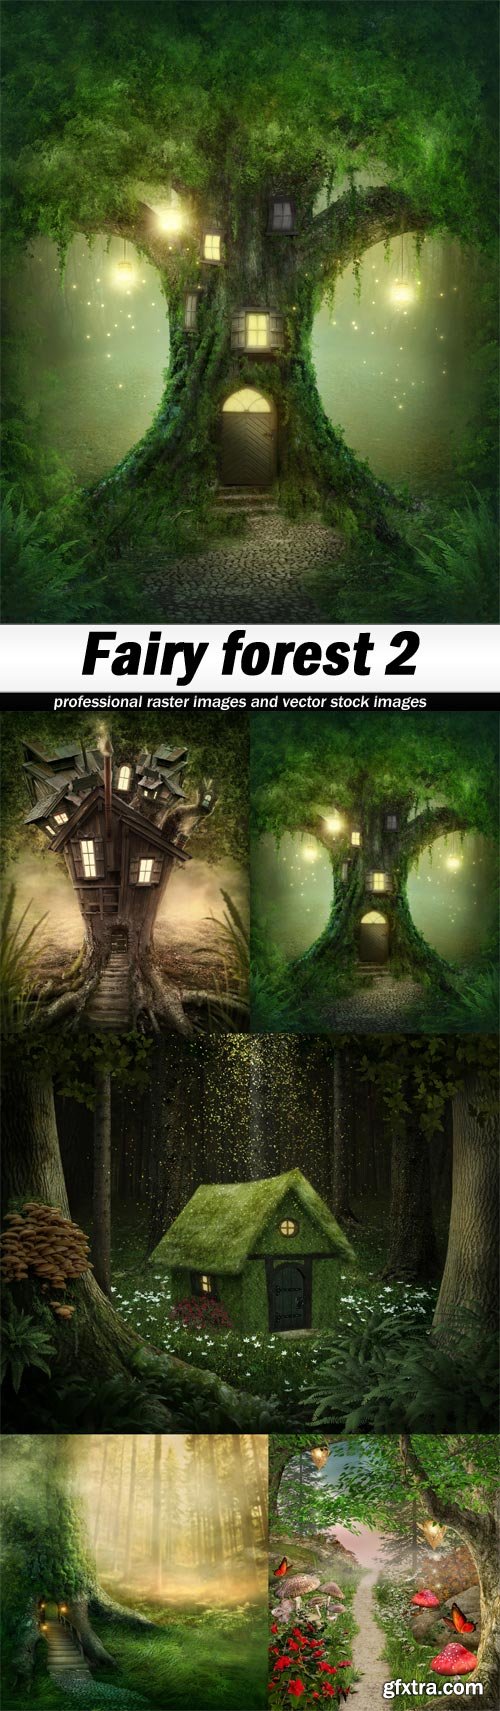 Fairy forest 2